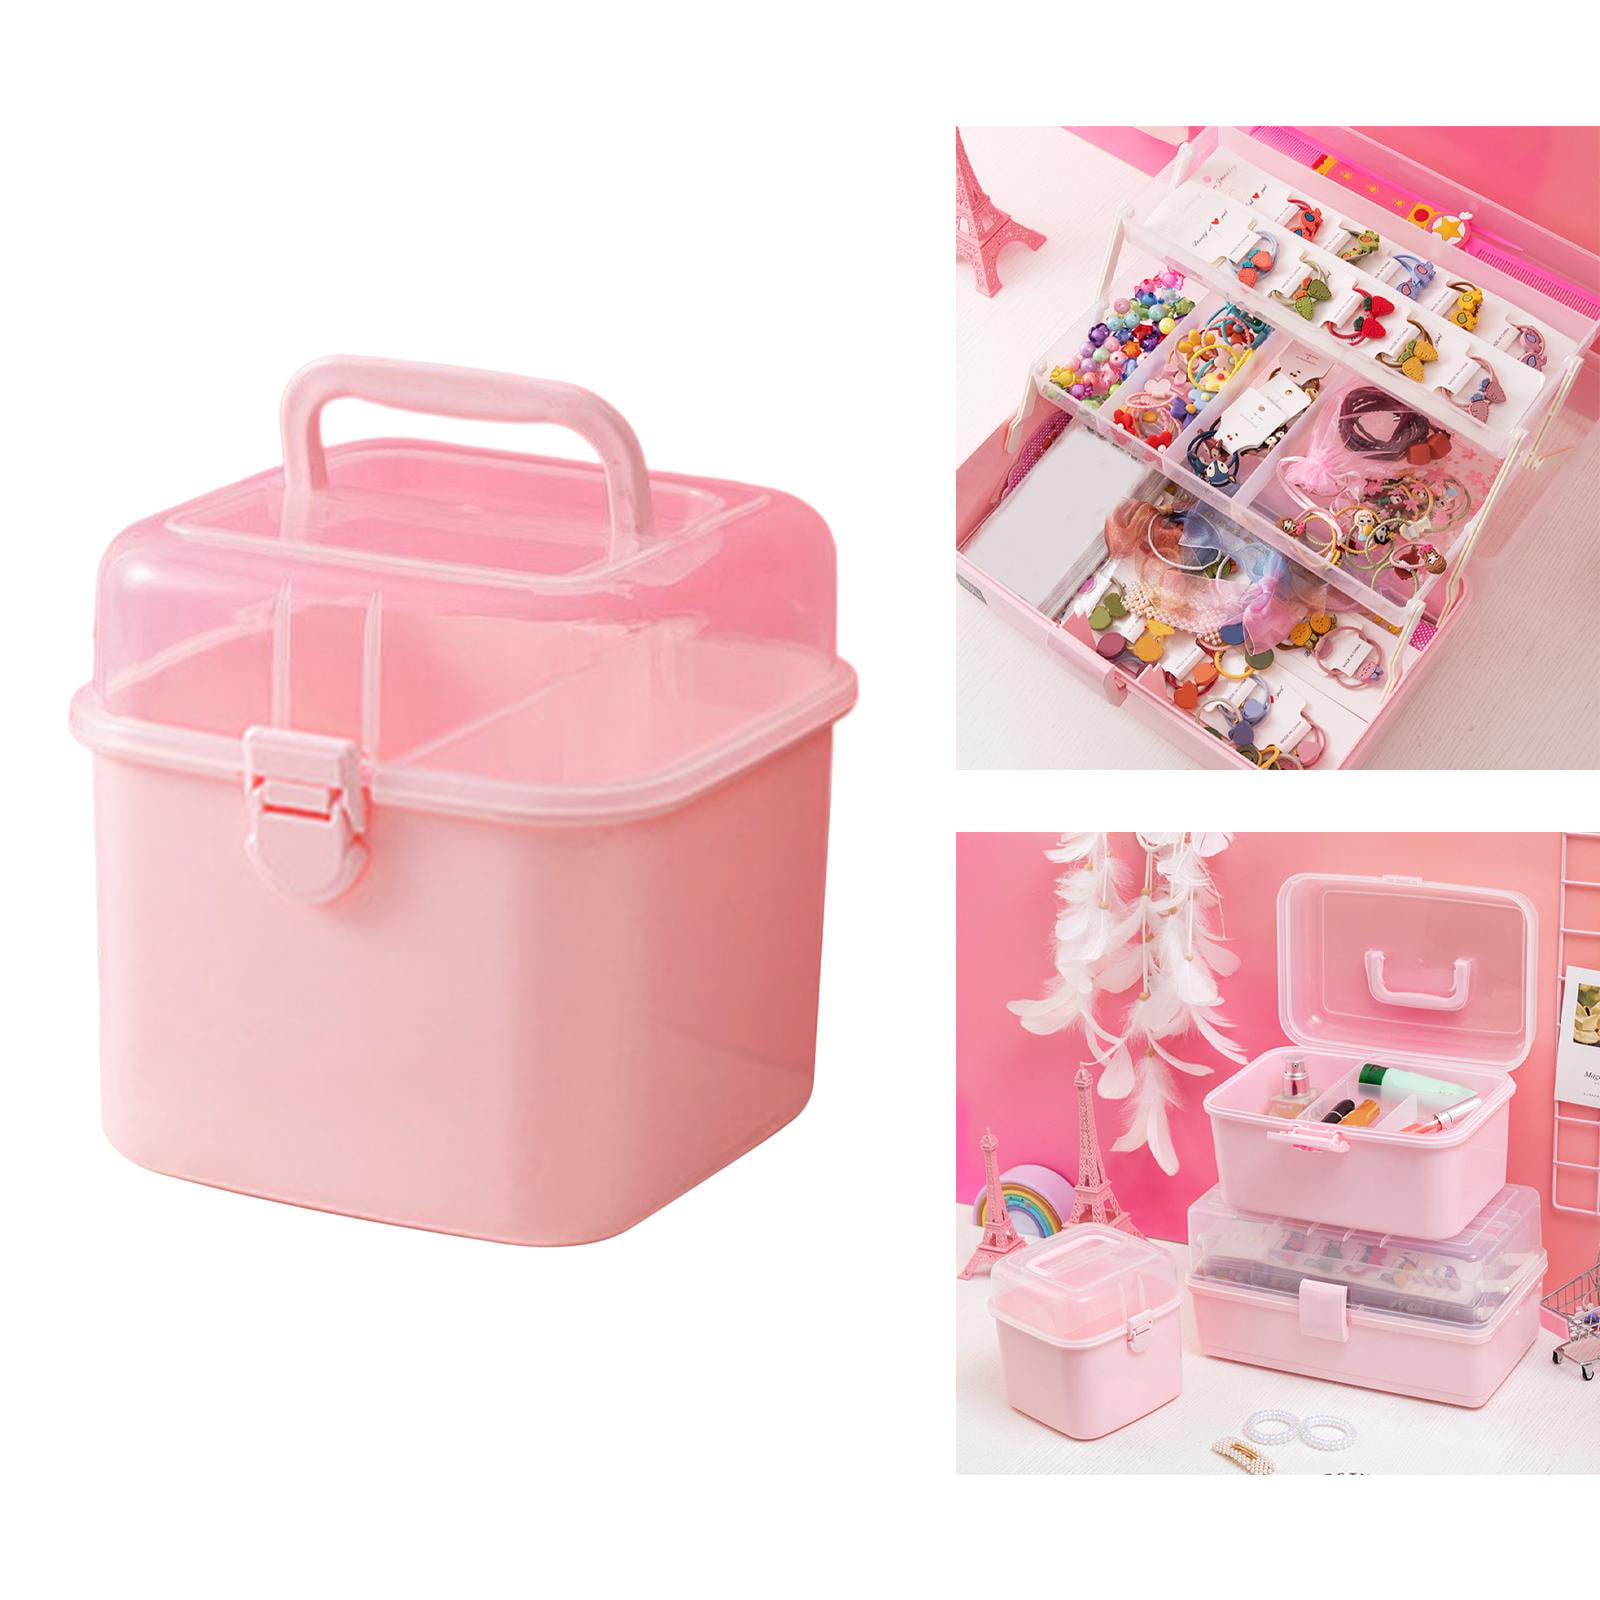 SEAHOME 3-Tier Pink Storage Box Hair Accessories Organizer for Girls Multipurpose Cosmetics Supplies Storage Box Portable Lockable Container